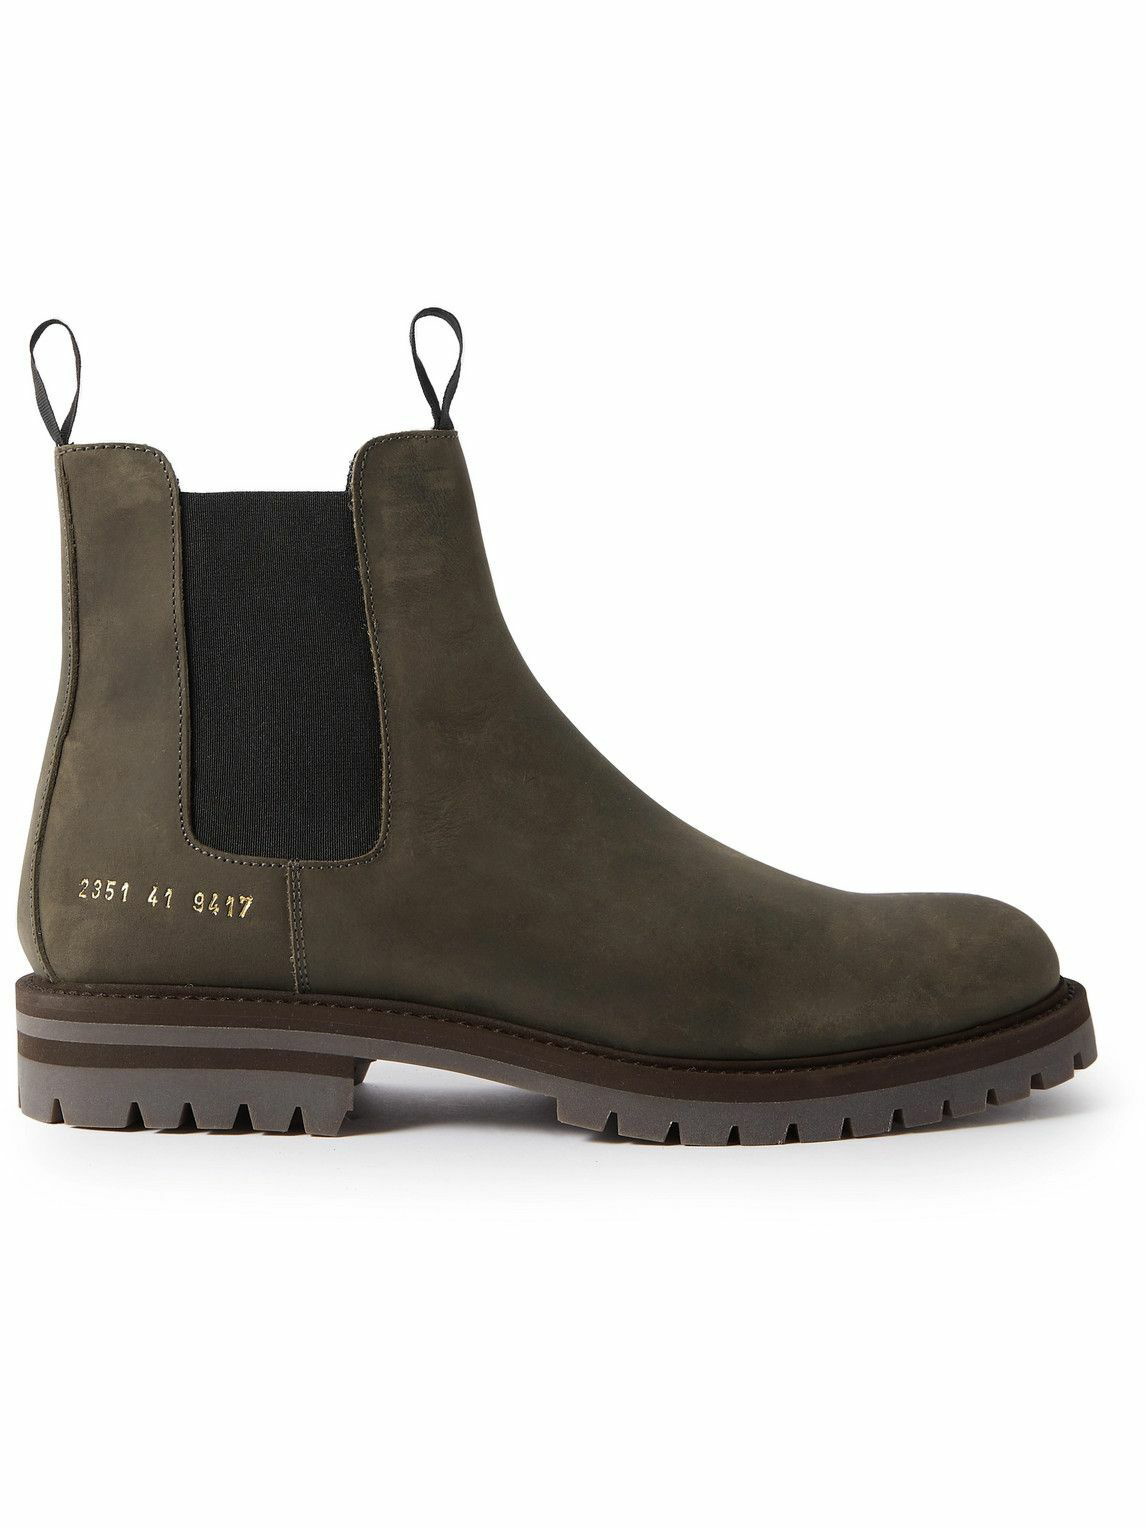 Tether Vandre Idol Common Projects - Suede Chelsea Boots - Brown Common Projects